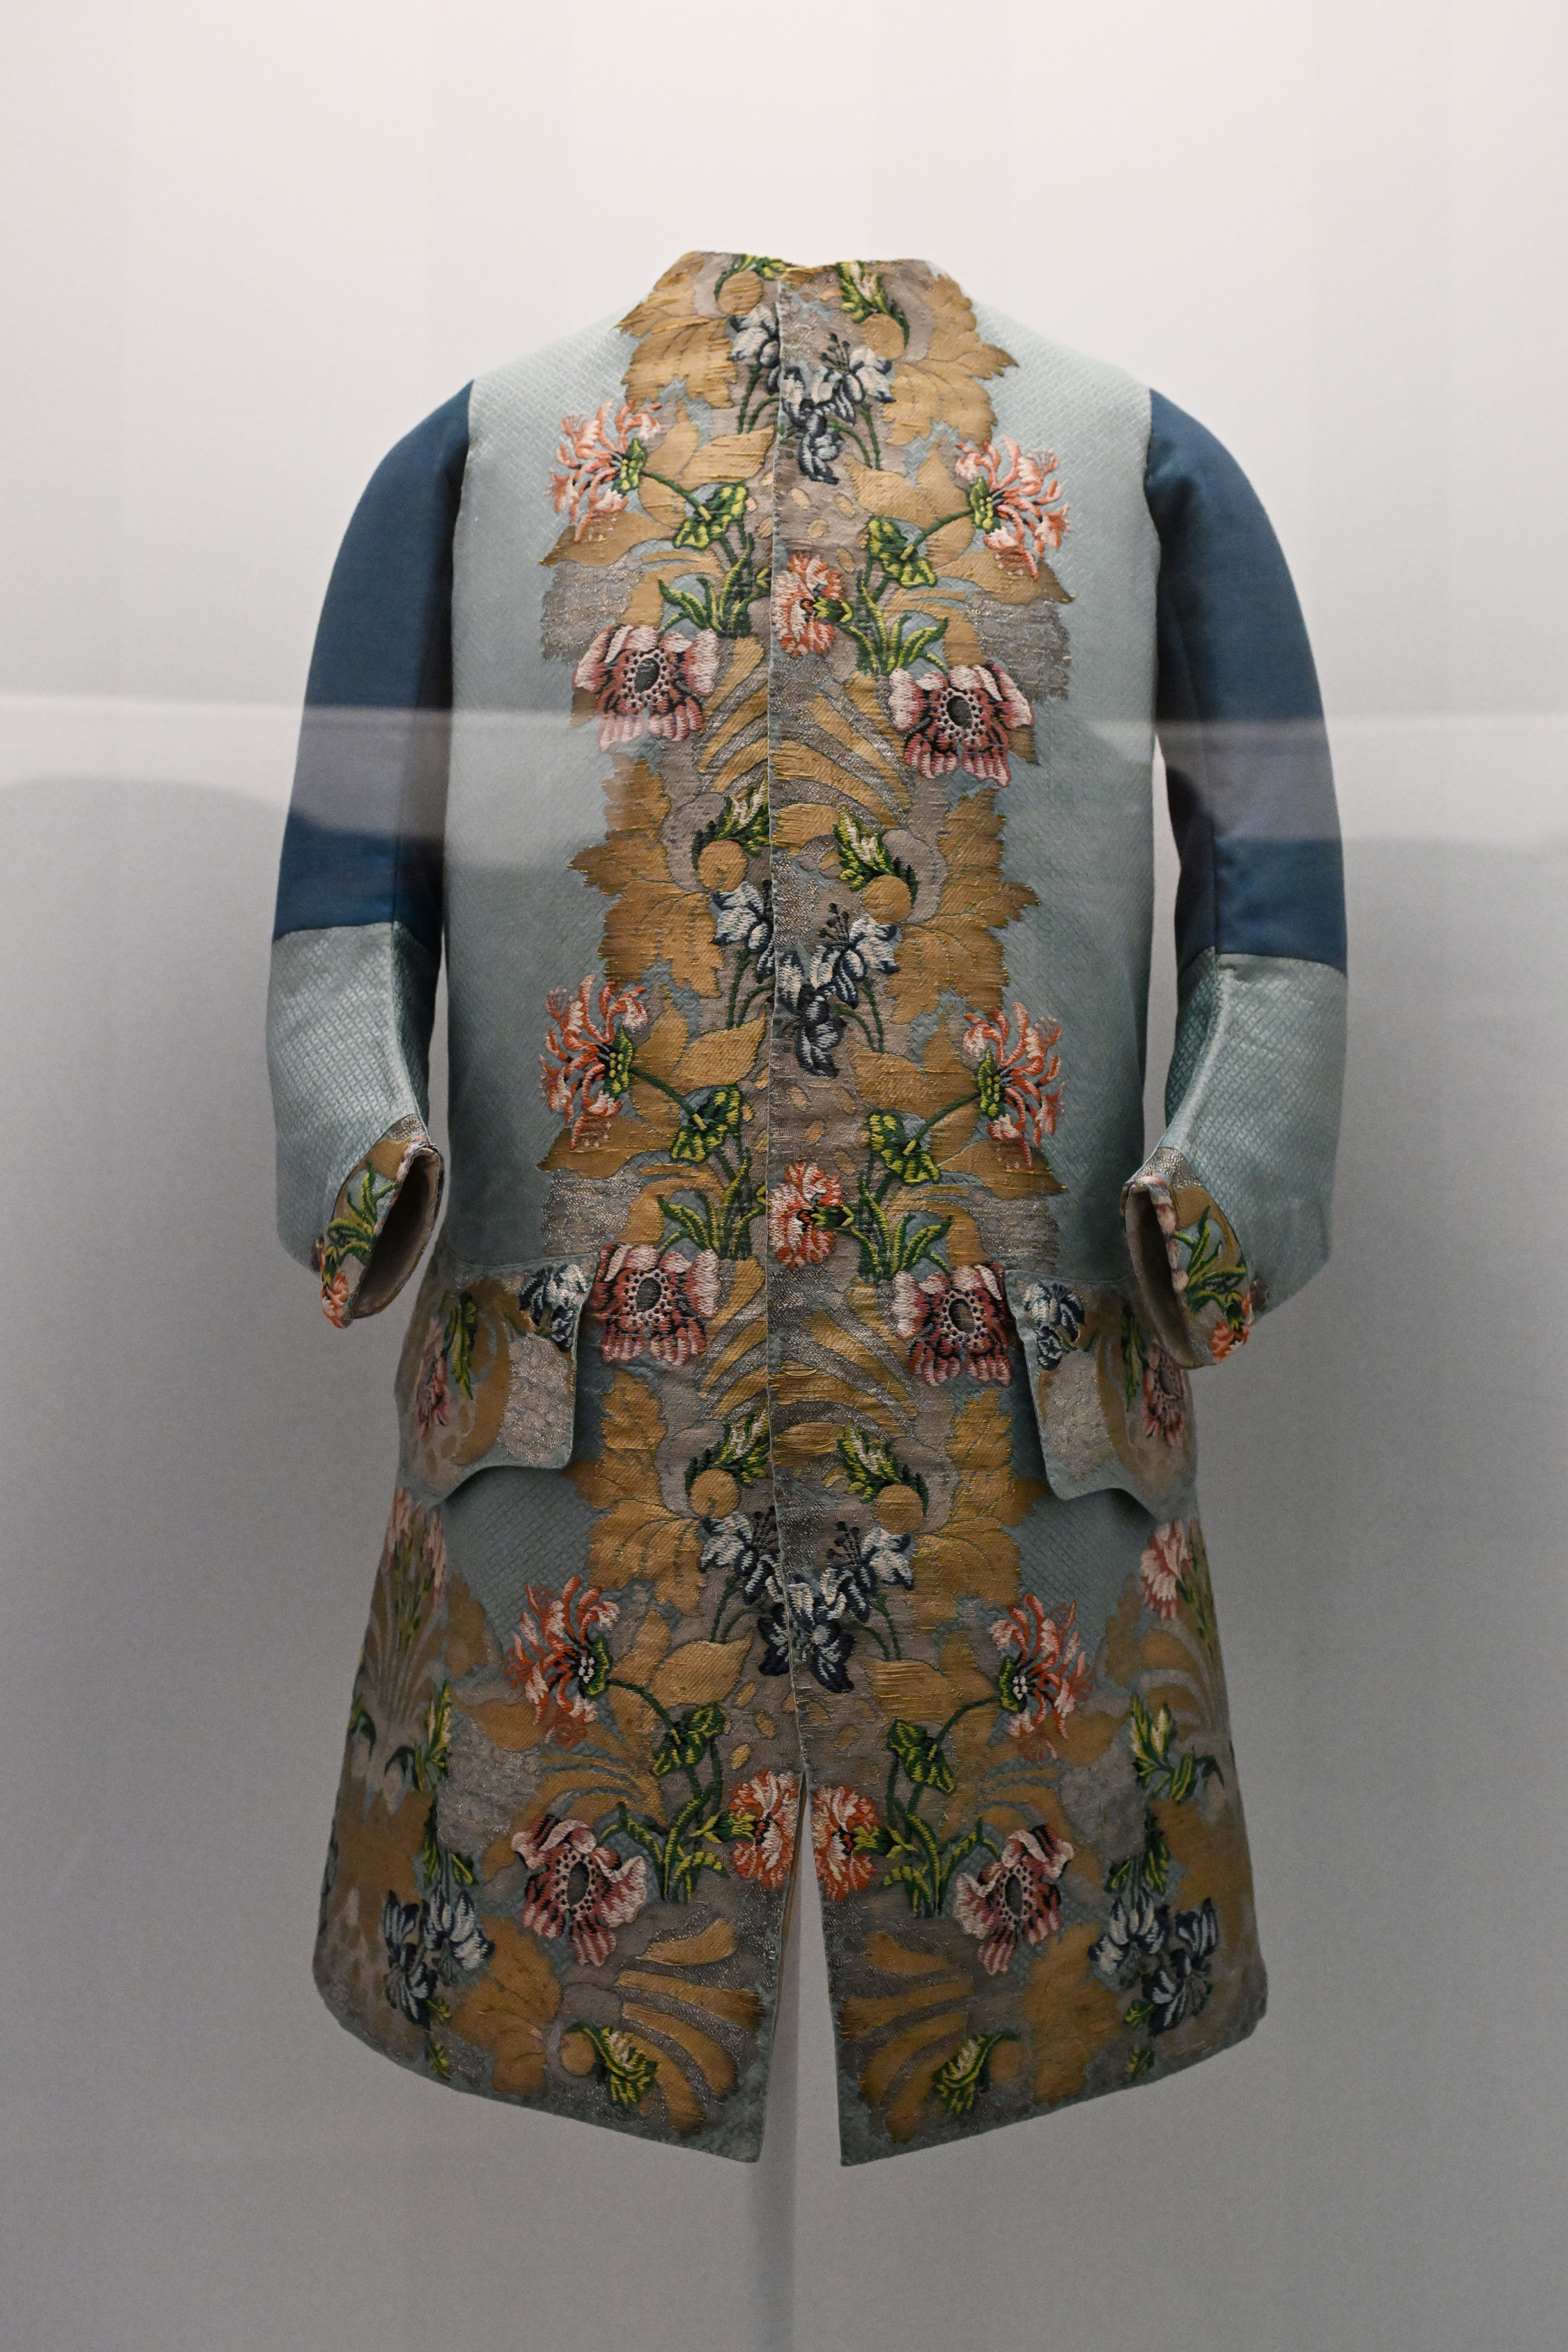 Embroidered floral pattern on a display coat with blue sleeves